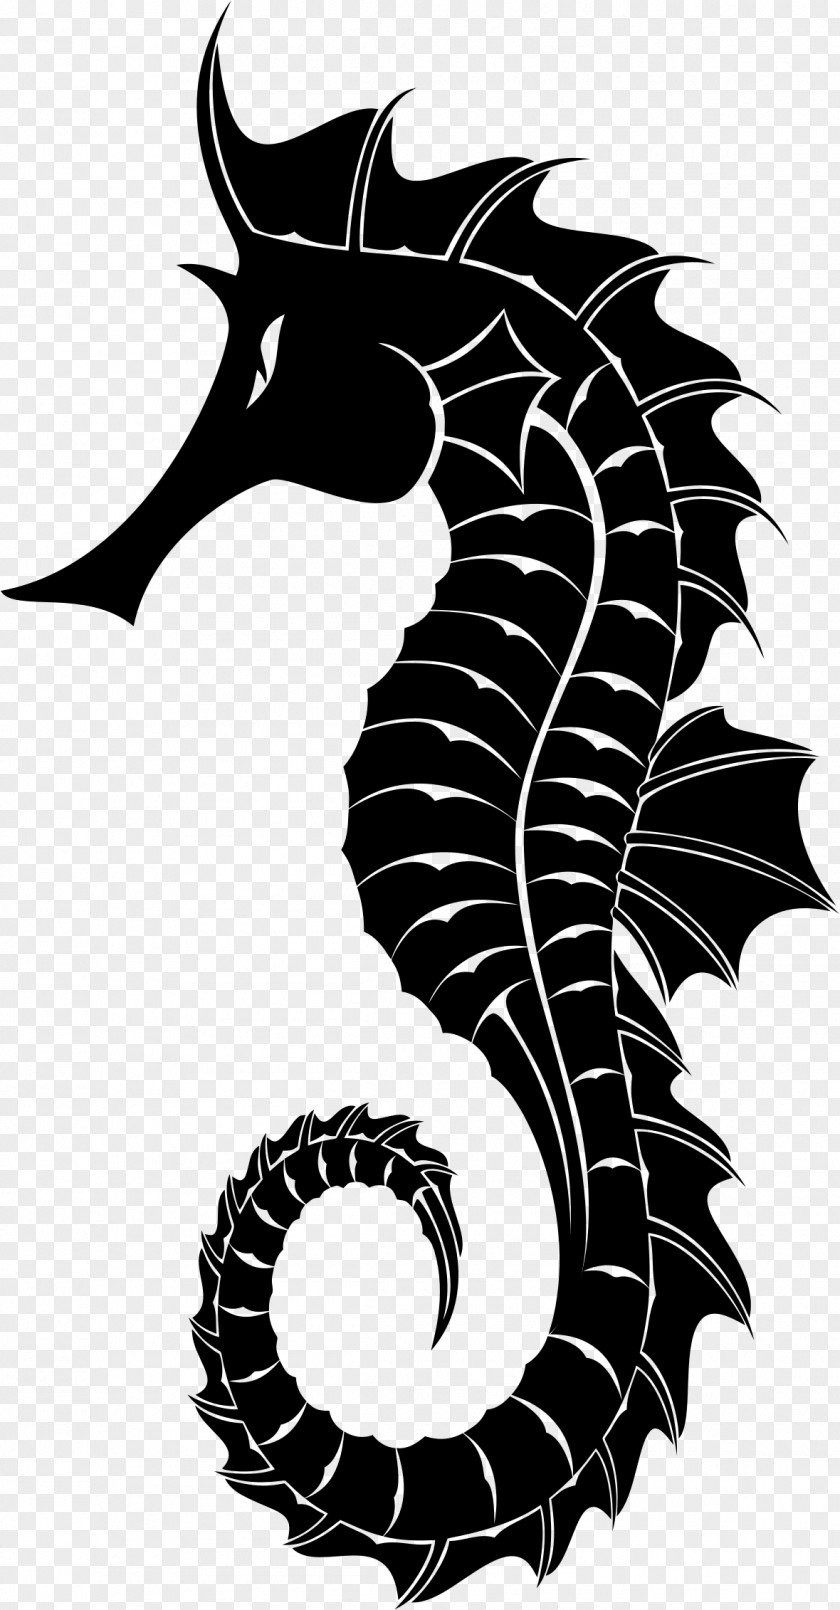 Seahorse Silhouette Great Clip Art PNG